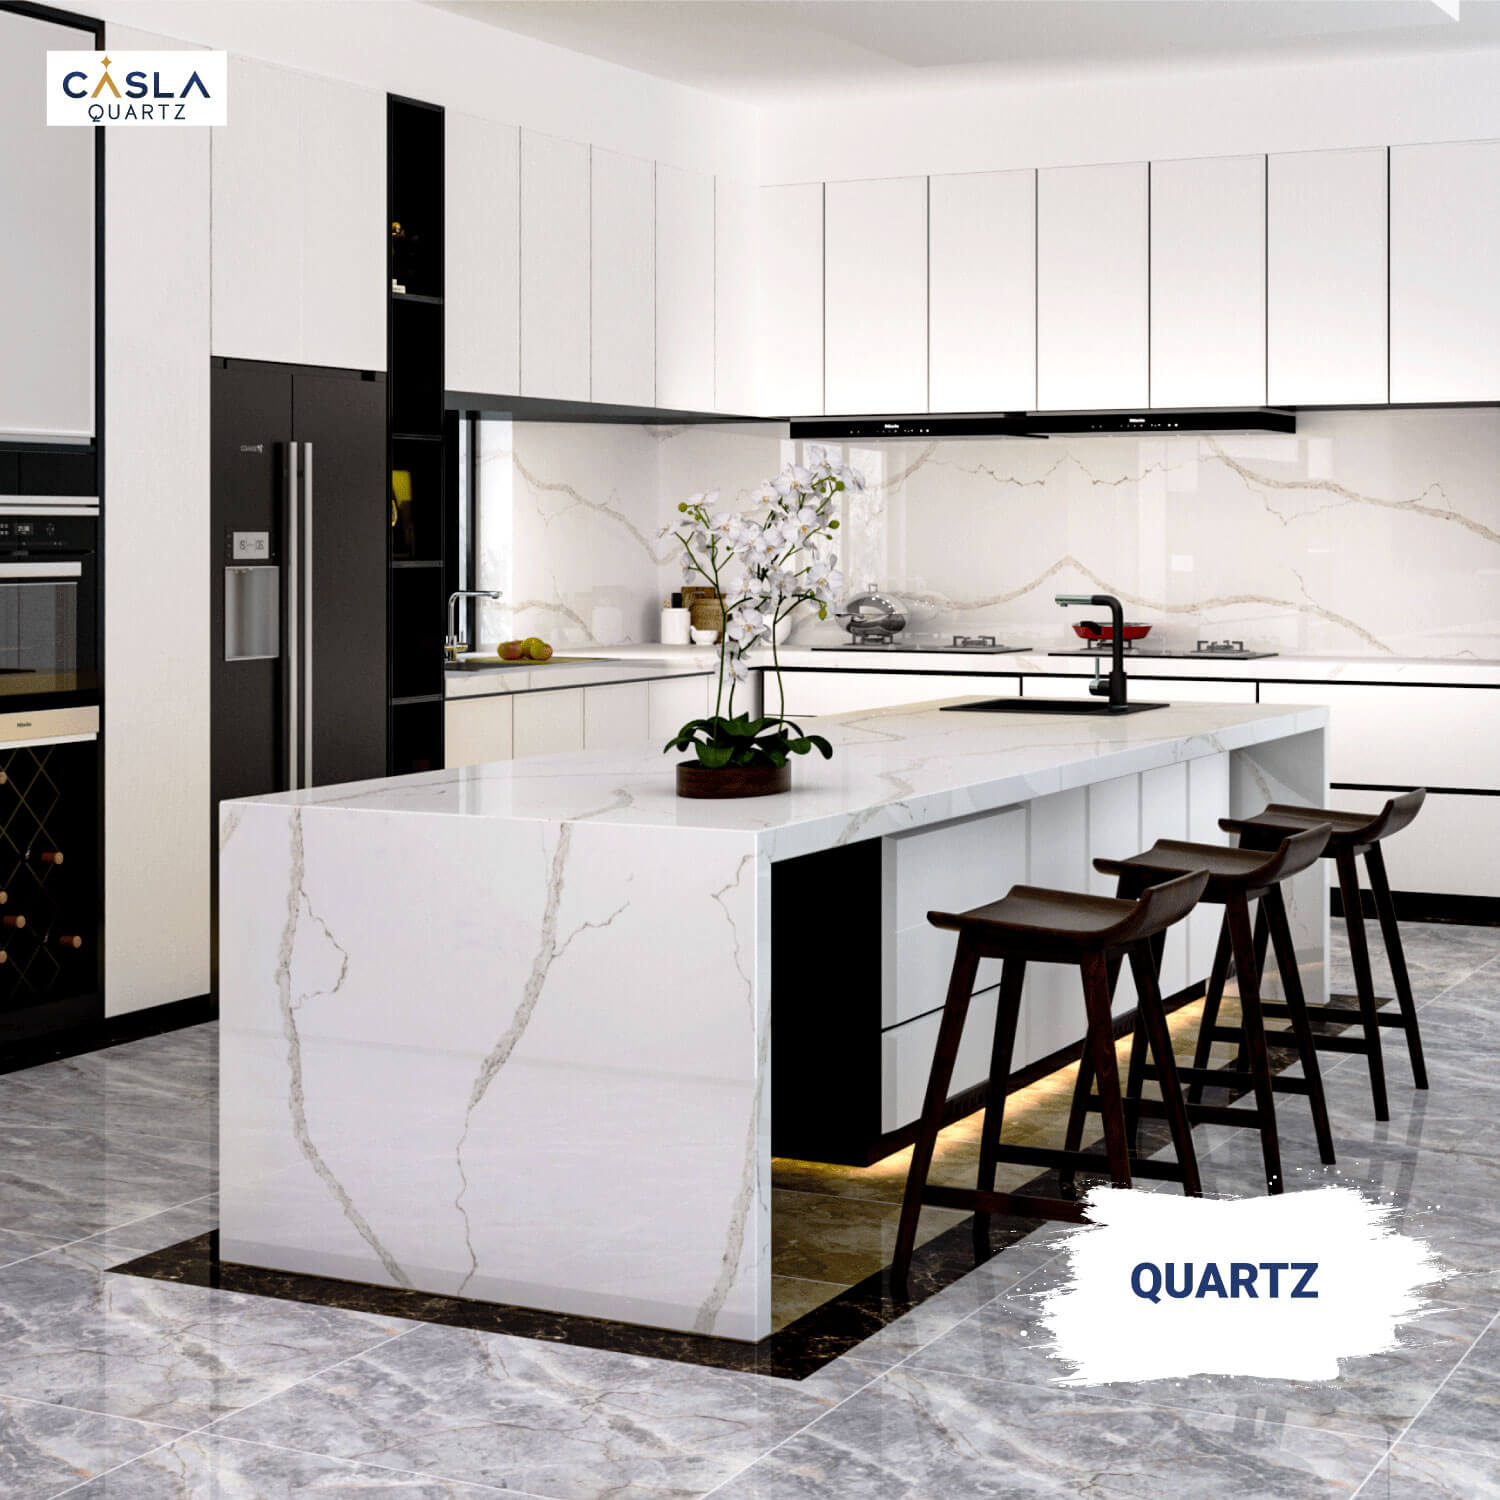 Types-of-stone -suitable-for- modern-kitchen -space-3-1.jpg